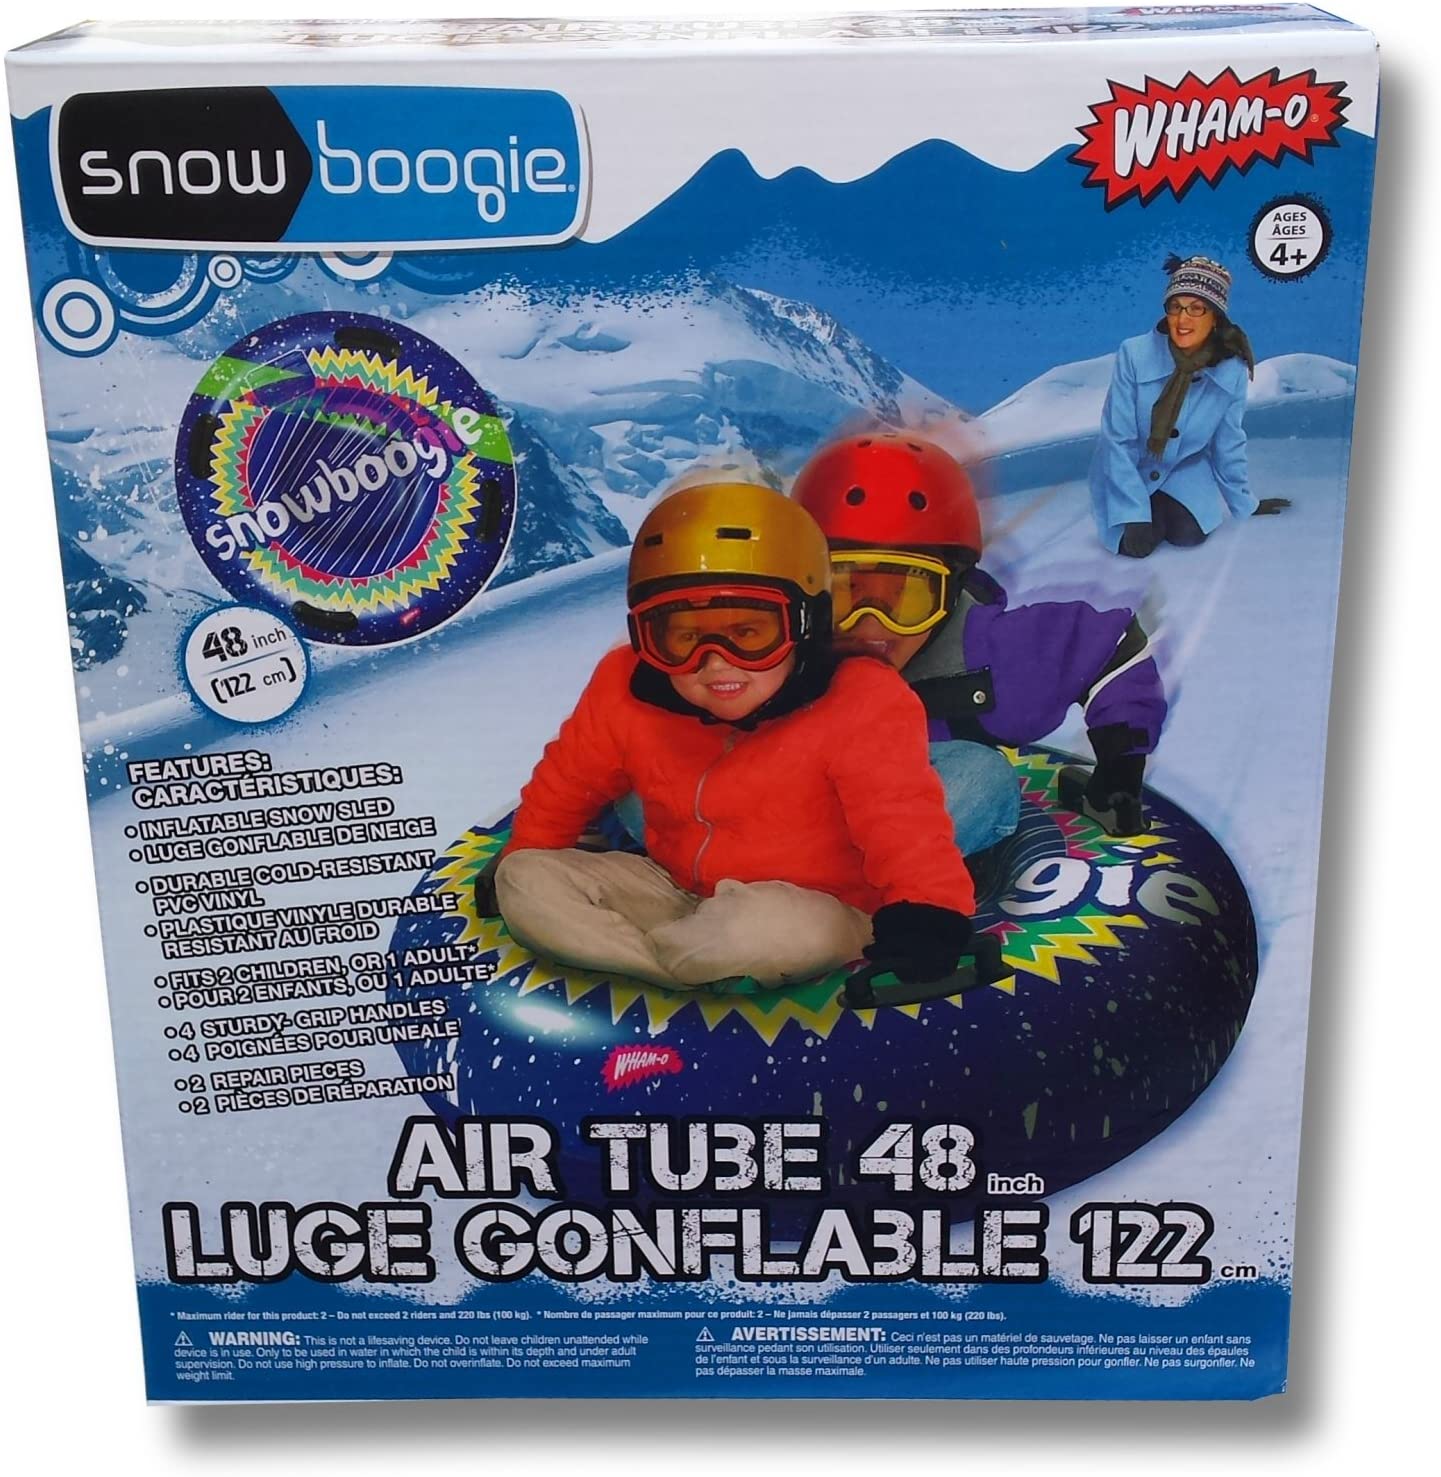 Snow Sledding for Adults /& Children Holidays /& Winter Inflatable Sled with Soft Handles Slick Bottom for Speed /& Control Wham-O Snowboogie Air Sled 32 Single Rider Snow Racing Car Sled